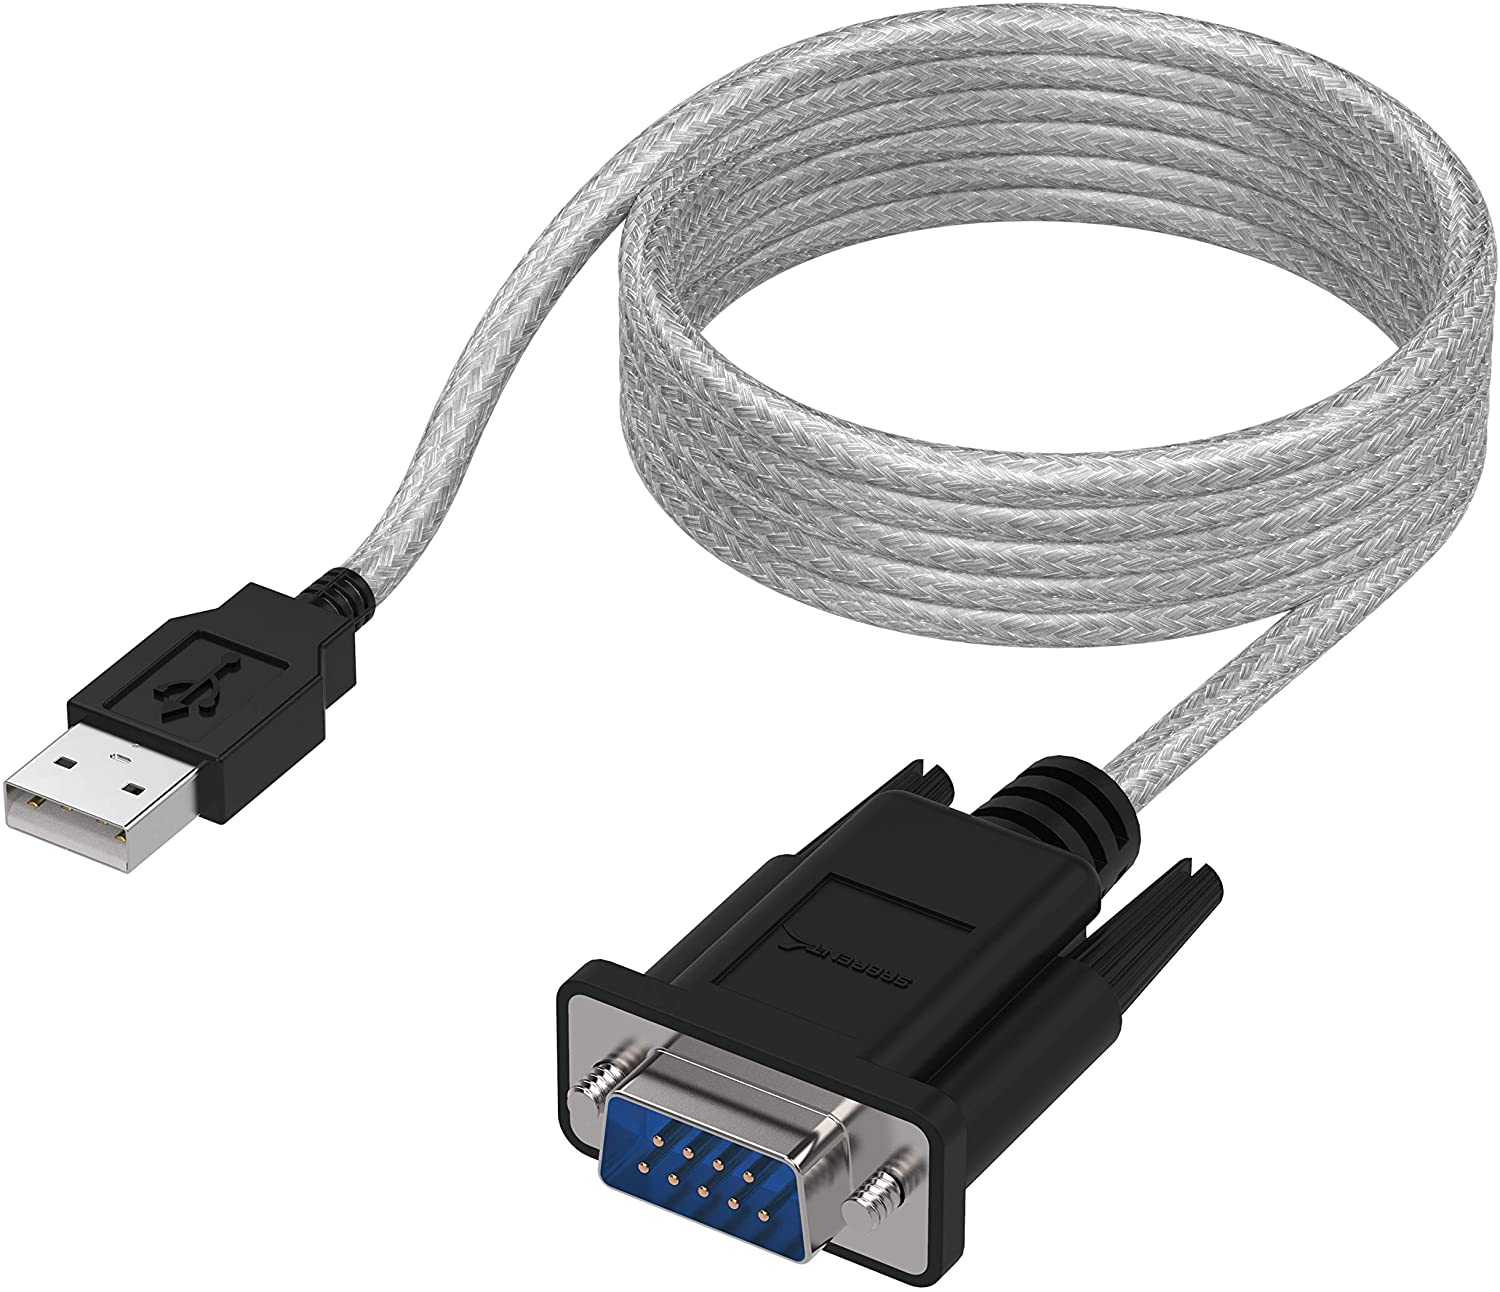 Diligence slidbane patrice USB To DB9 Serial Adapter With 6 Ft Cable | Cables.com